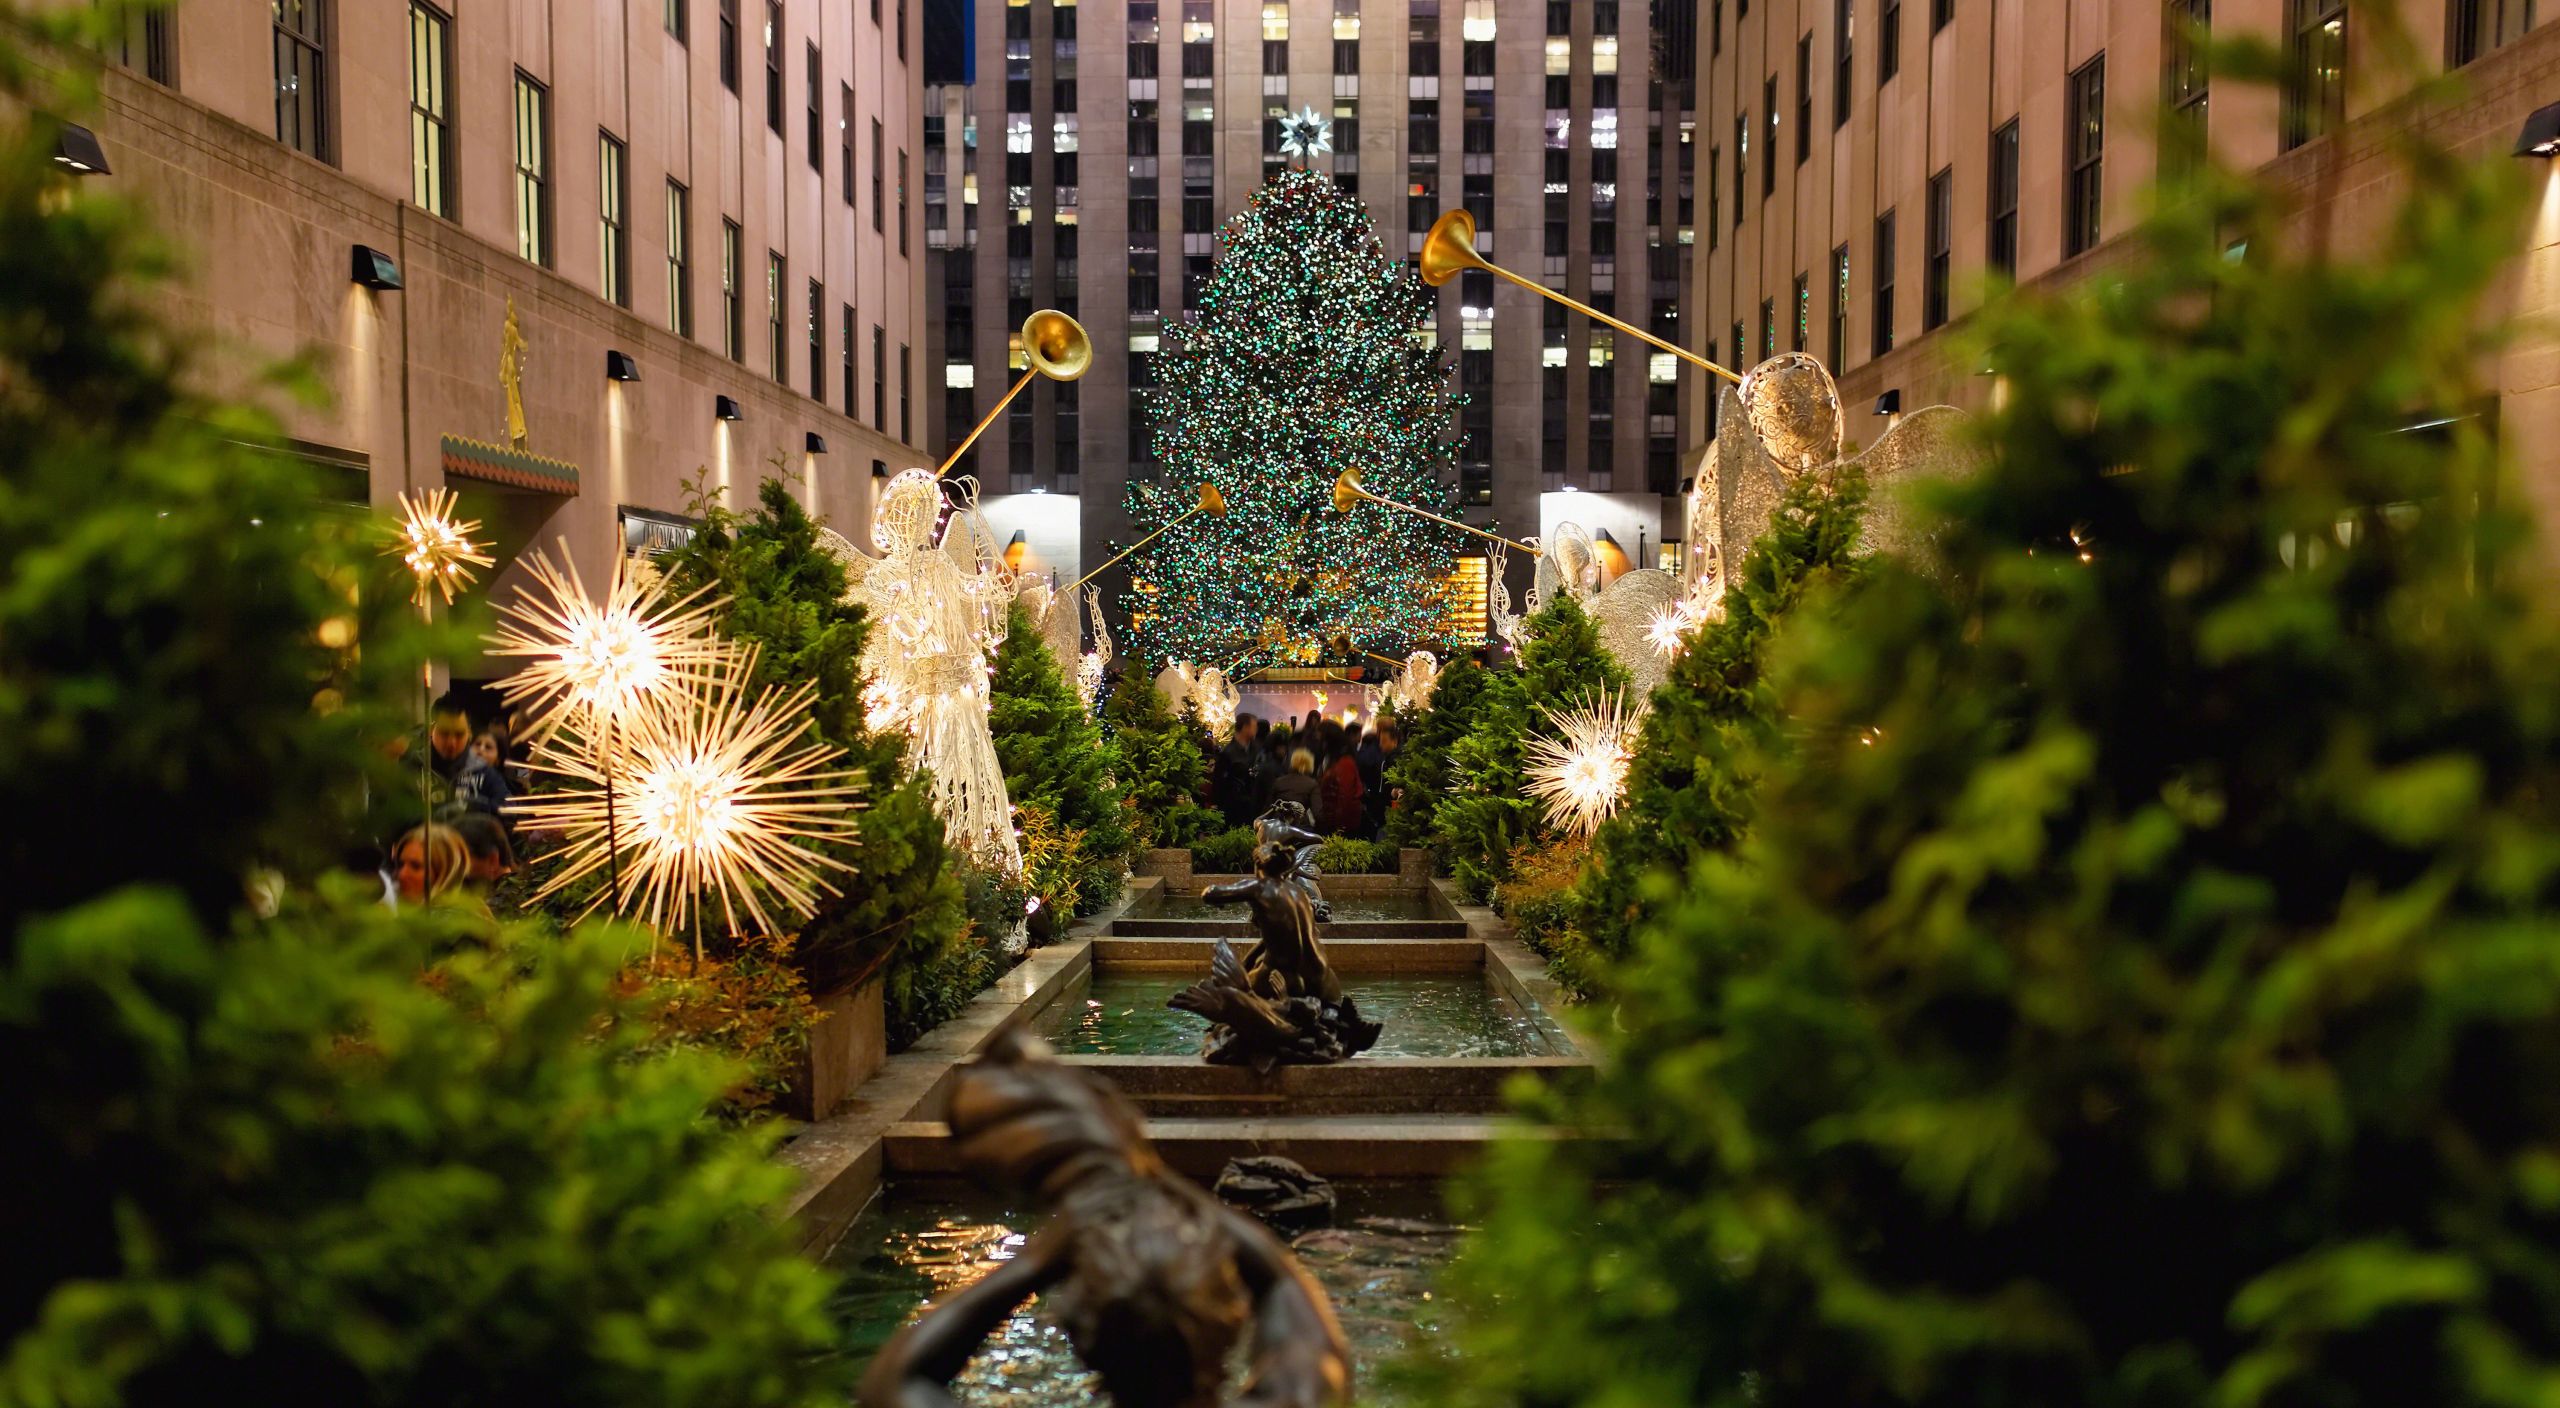 Pool City Christmas Trees
 A Brief History of the Christmas Tree in Rockefeller Center